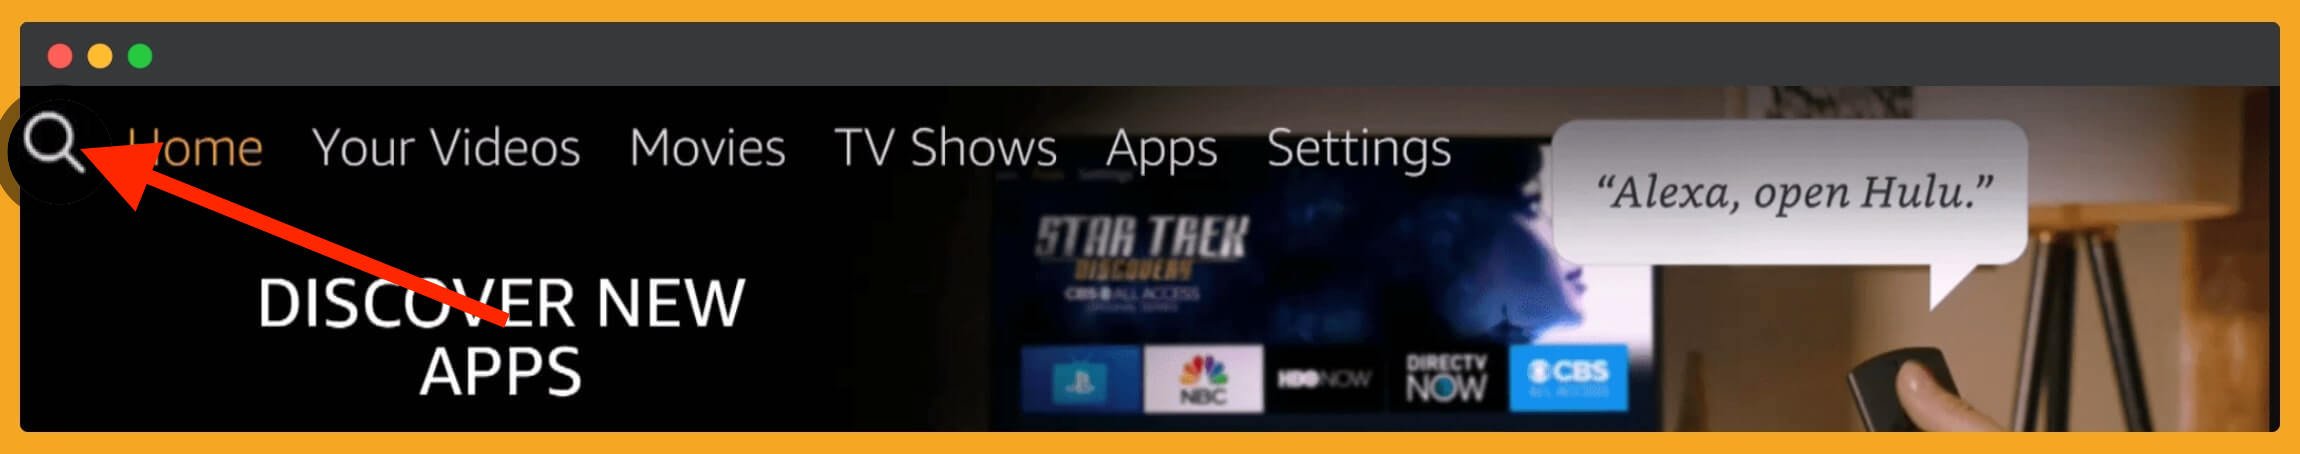 select-Search-box-from-Amazon-Firestick-Home-Screen